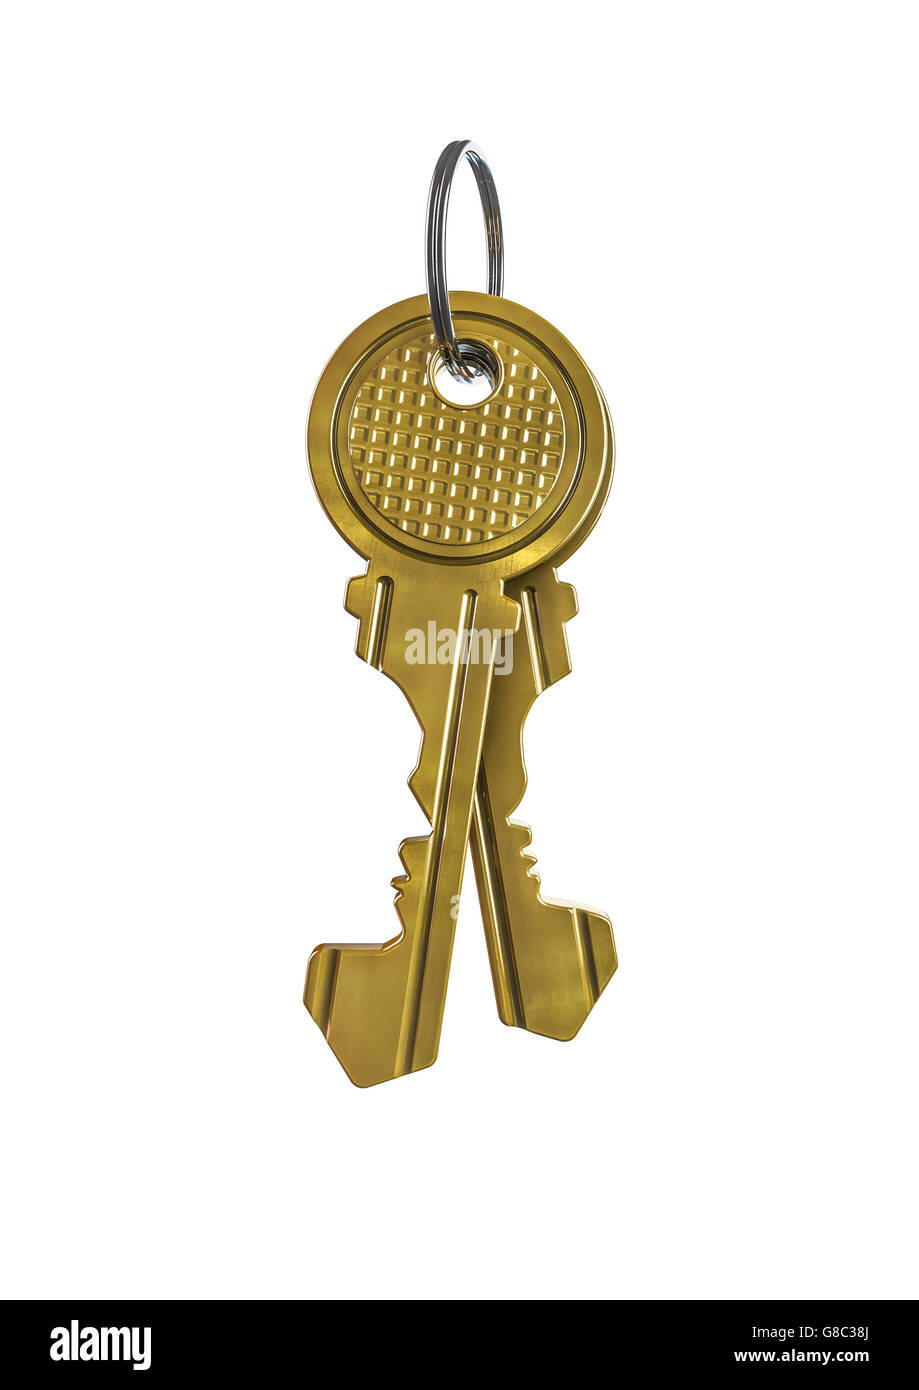 Key couple profile / 3D illustration of house keys with male and female face profiles Stock Photo